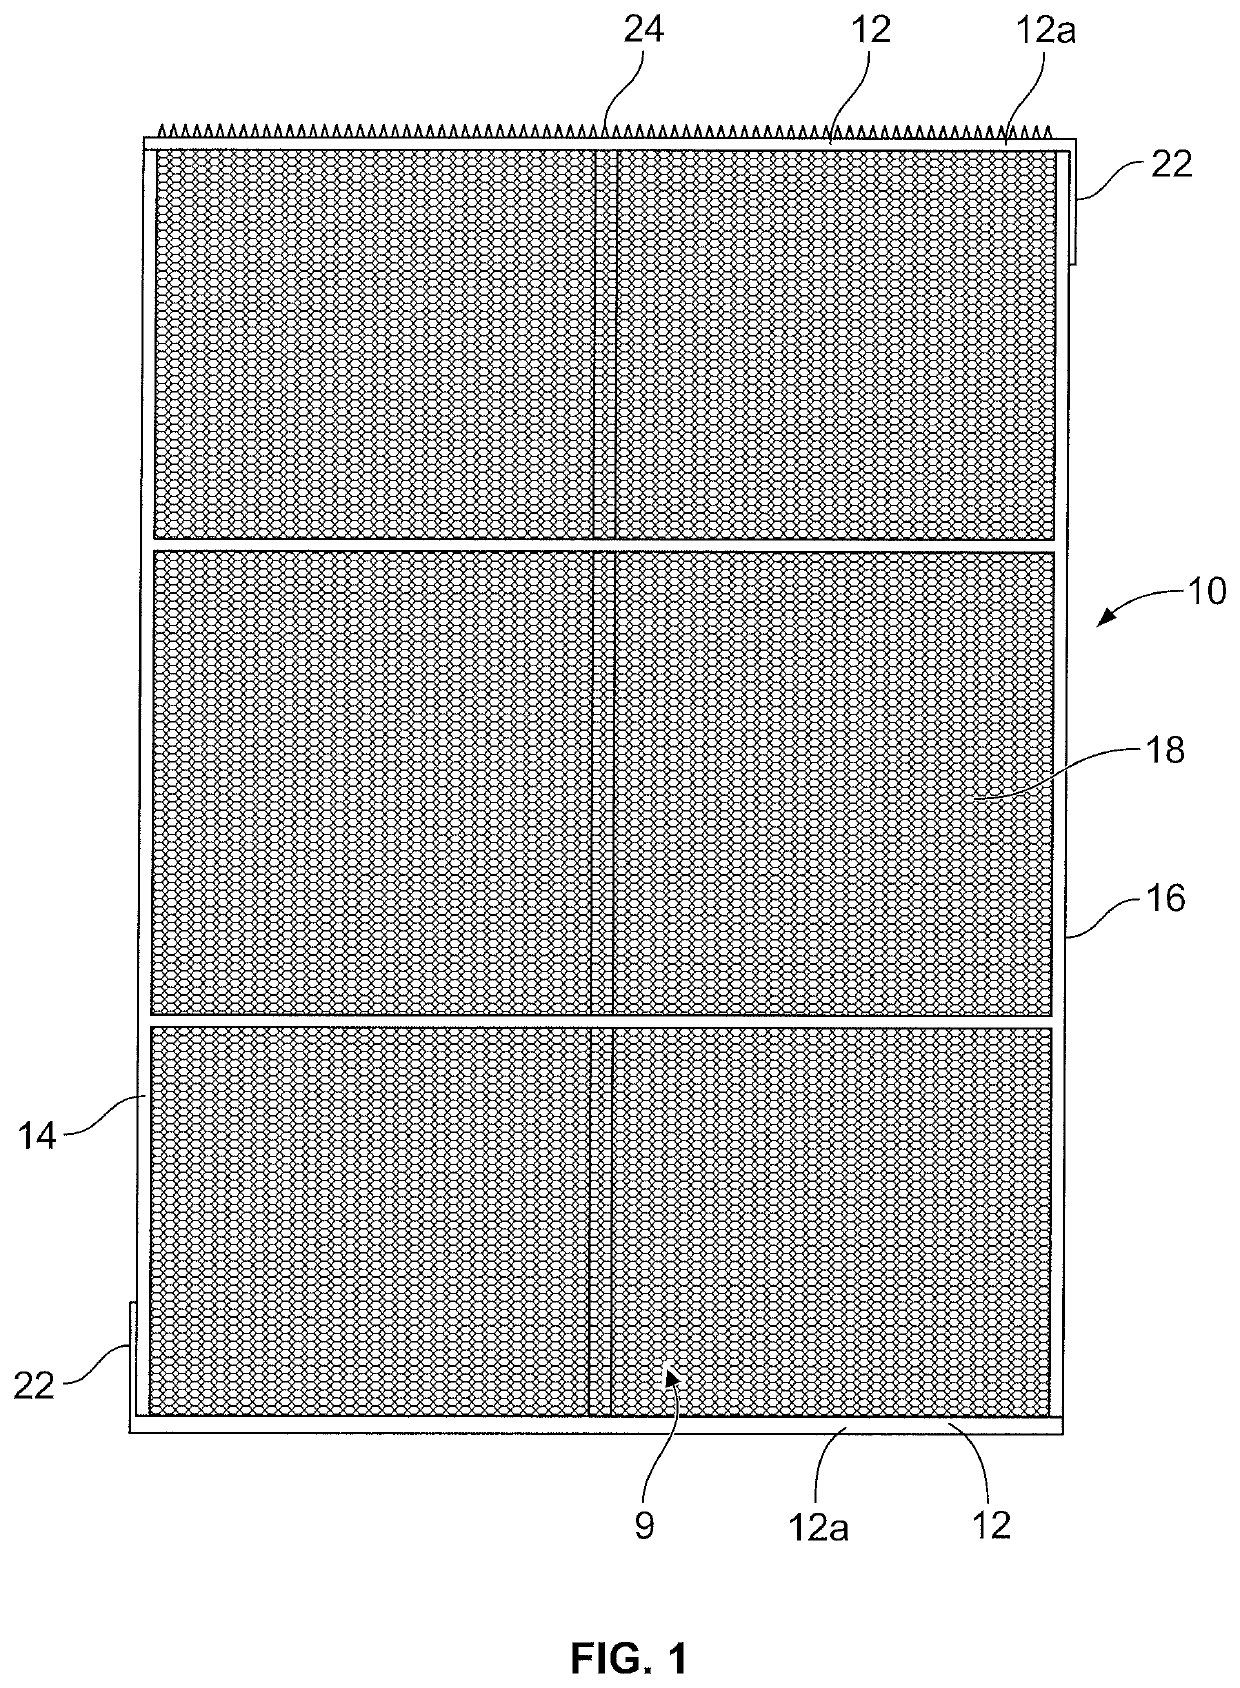 Enhanced security fence and method of construction and installation